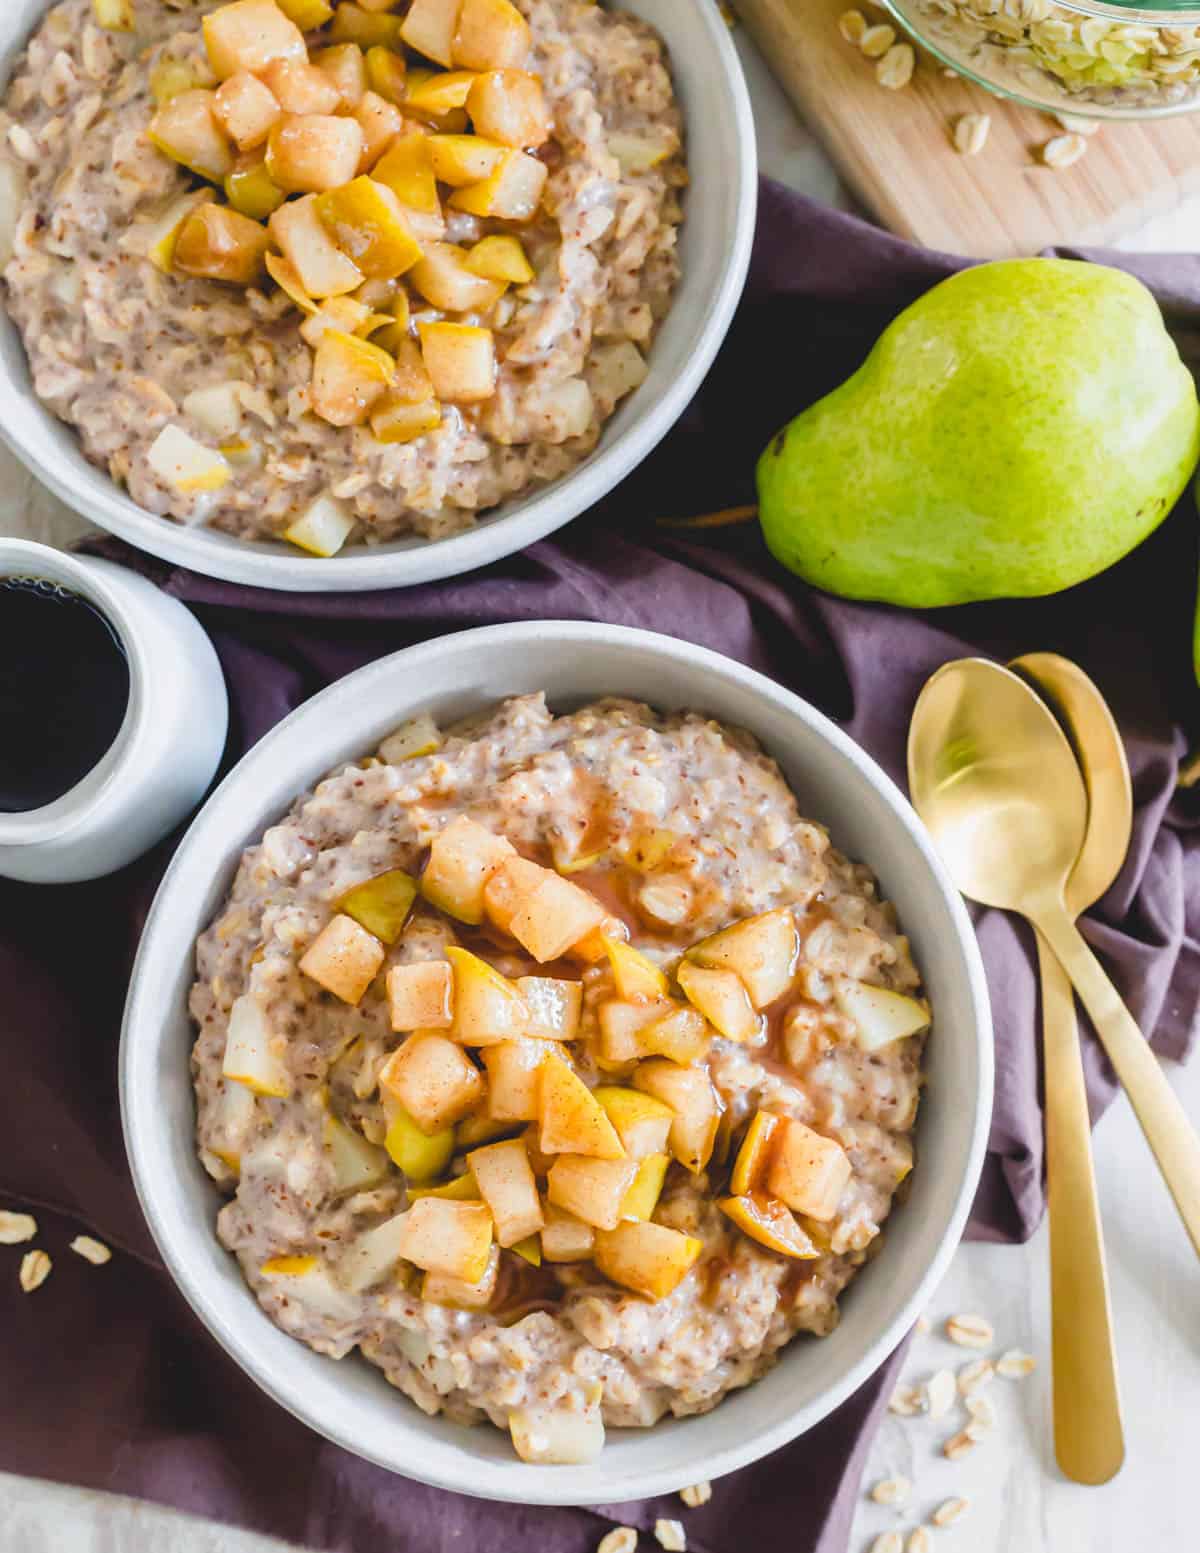 Cinnamon spiced pear oatmeal in a bowl with maple syrup.